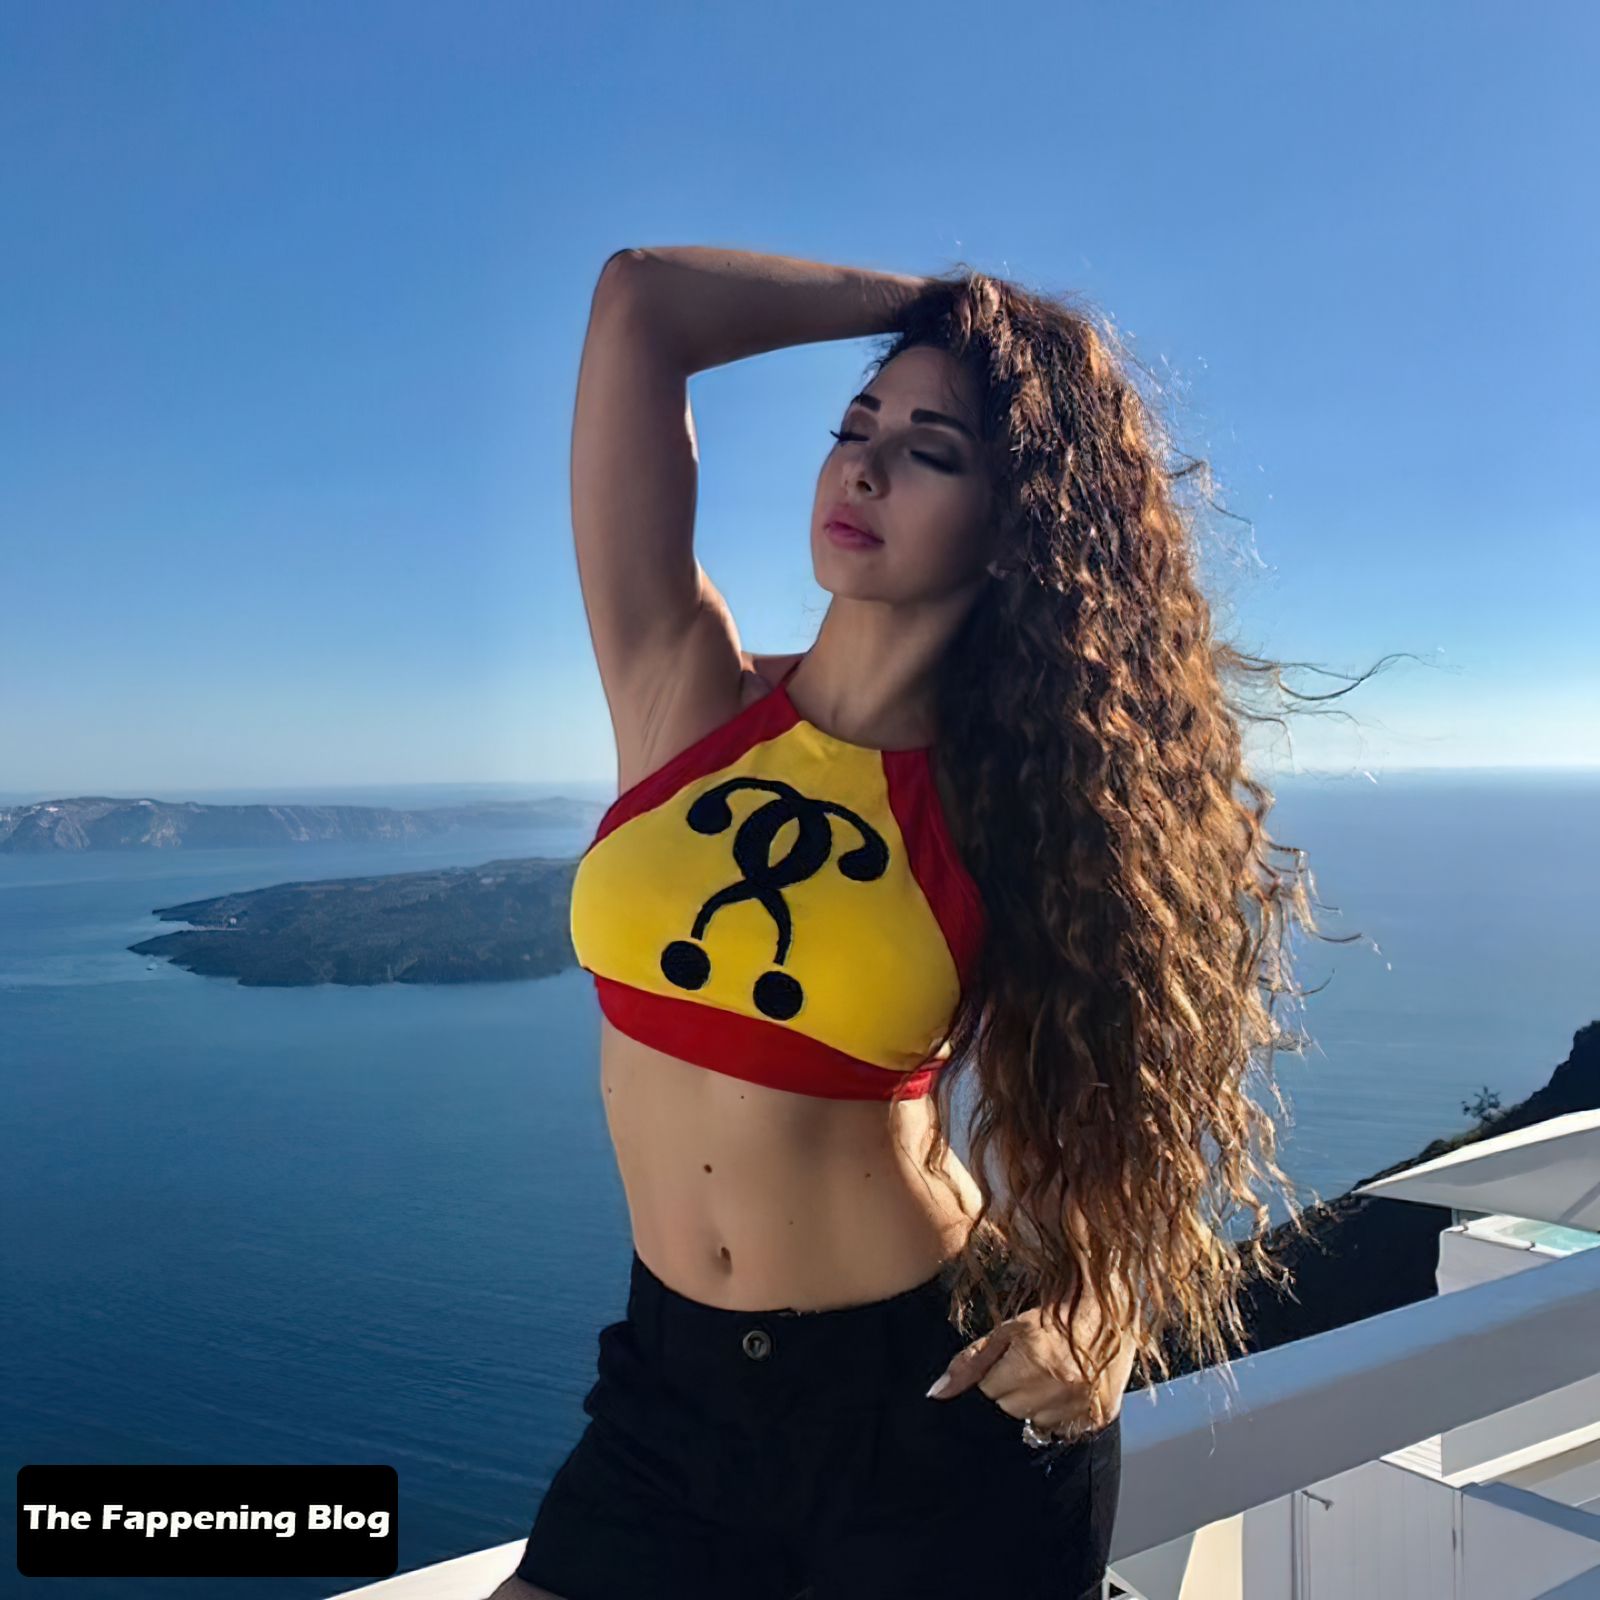 Myriam-Fares-Sexy-Collection-The-Fappening-Blog-26.jpg